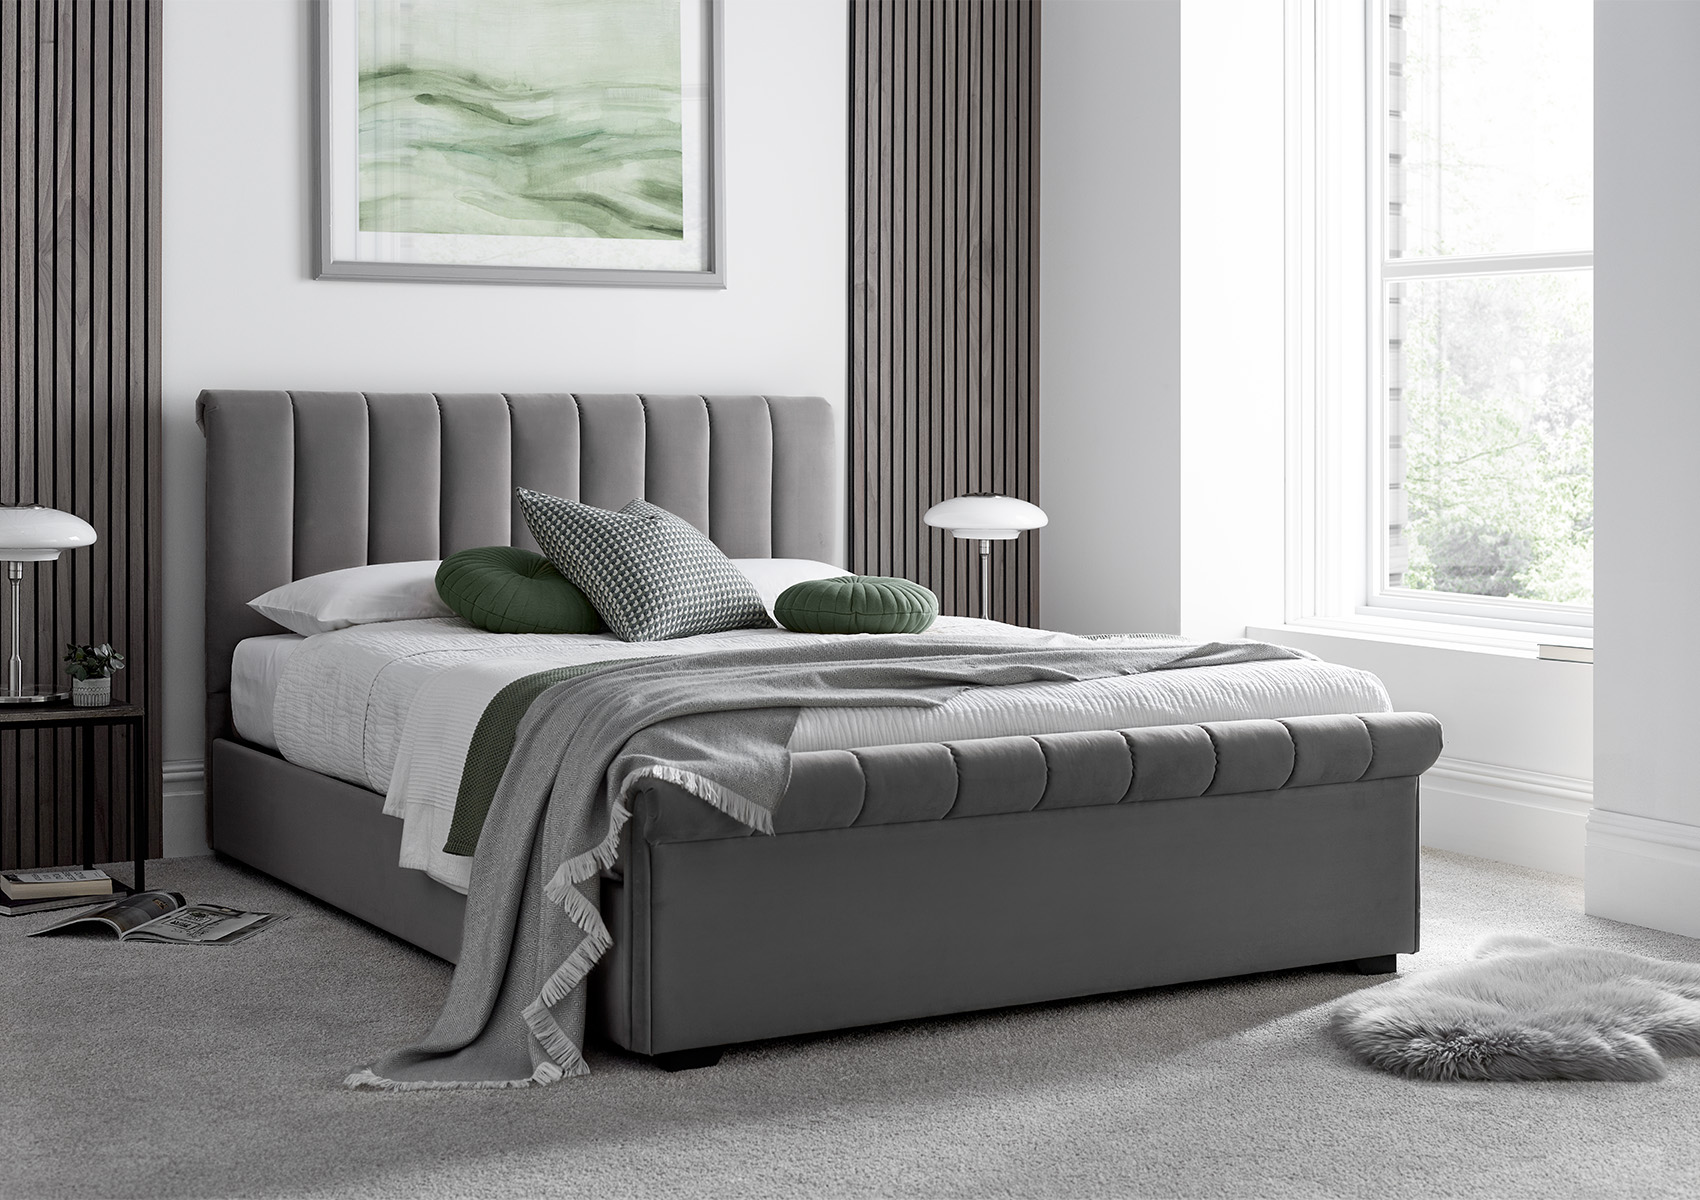 View Ascot Grey Upholstered Ottoman Storage Sleigh Bed Time4Sleep information